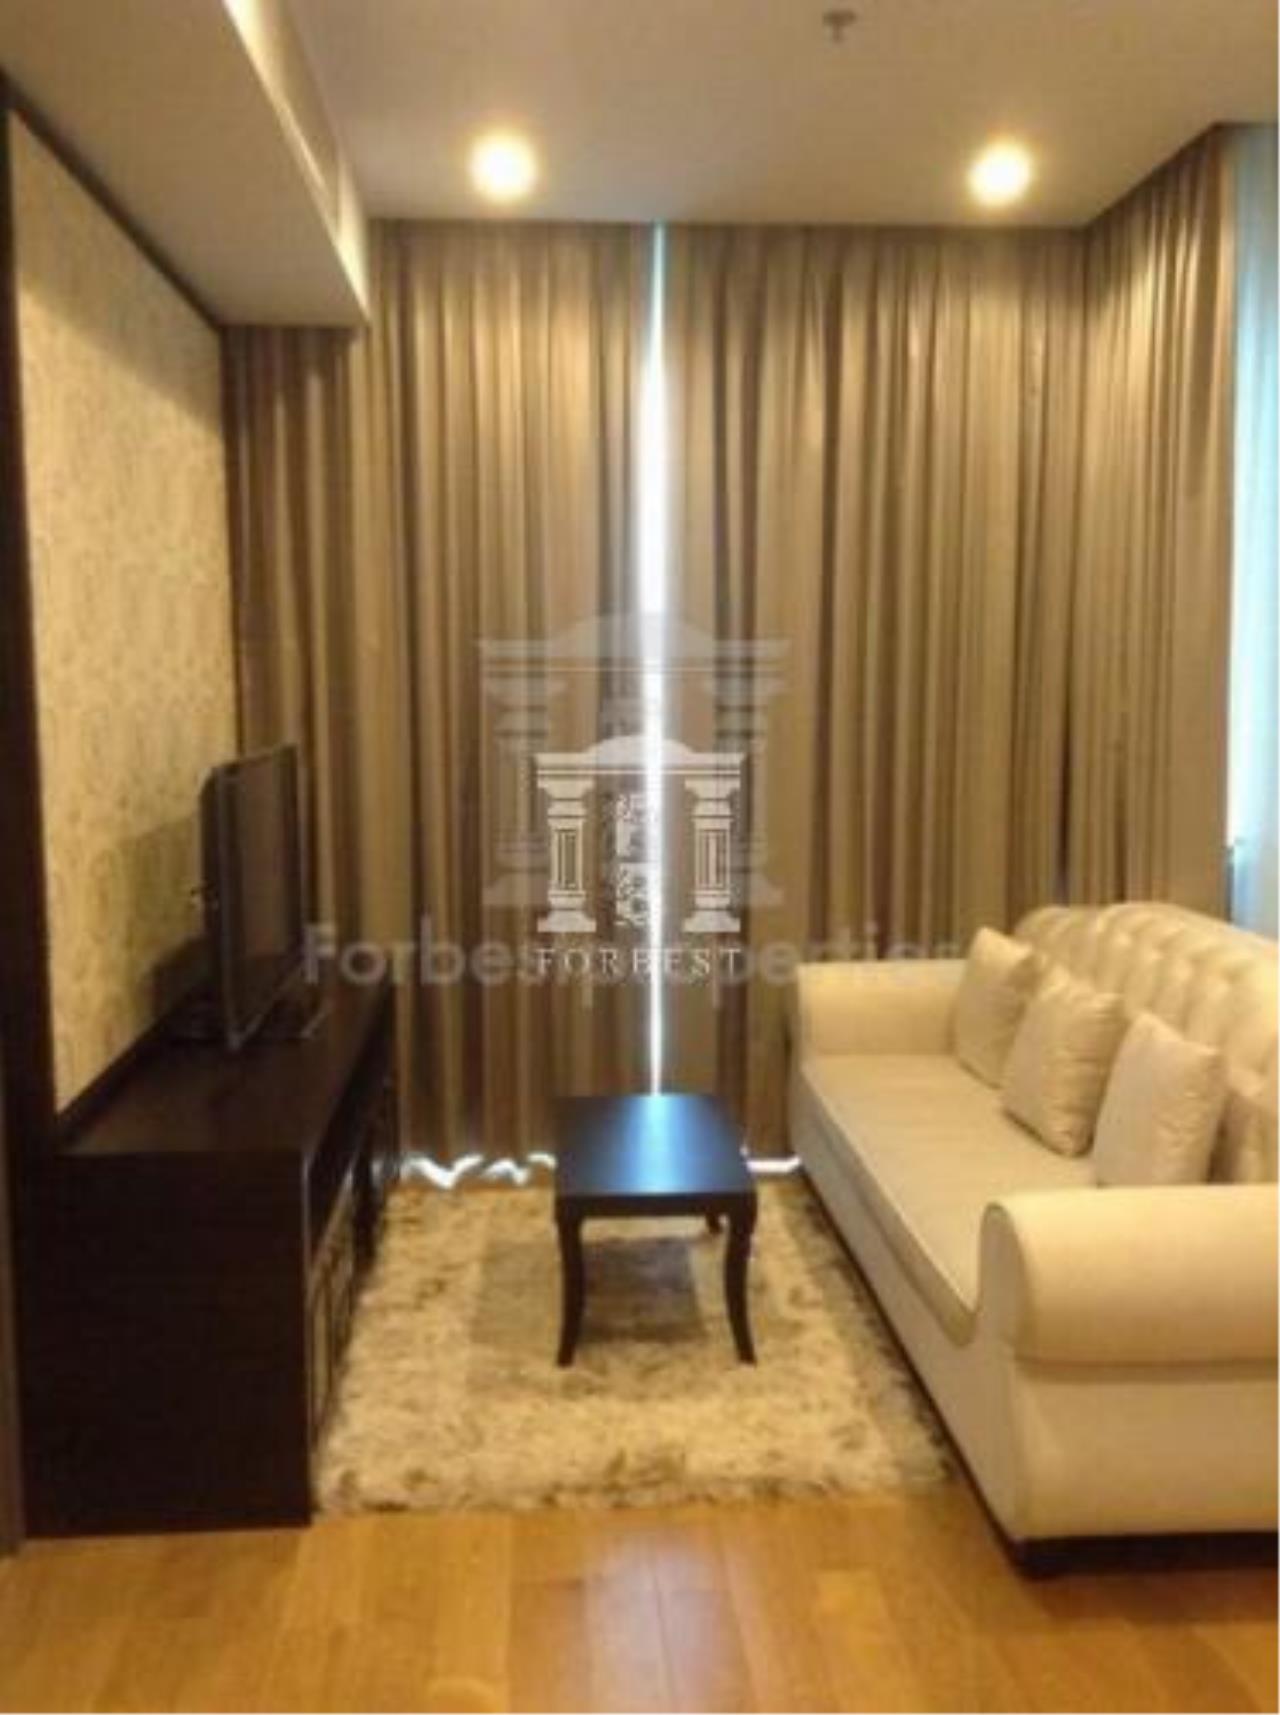 Forbest Properties Agency's 36136 - Condo for sale, 39 by Sansiri, area 56.31 sq.m. 6